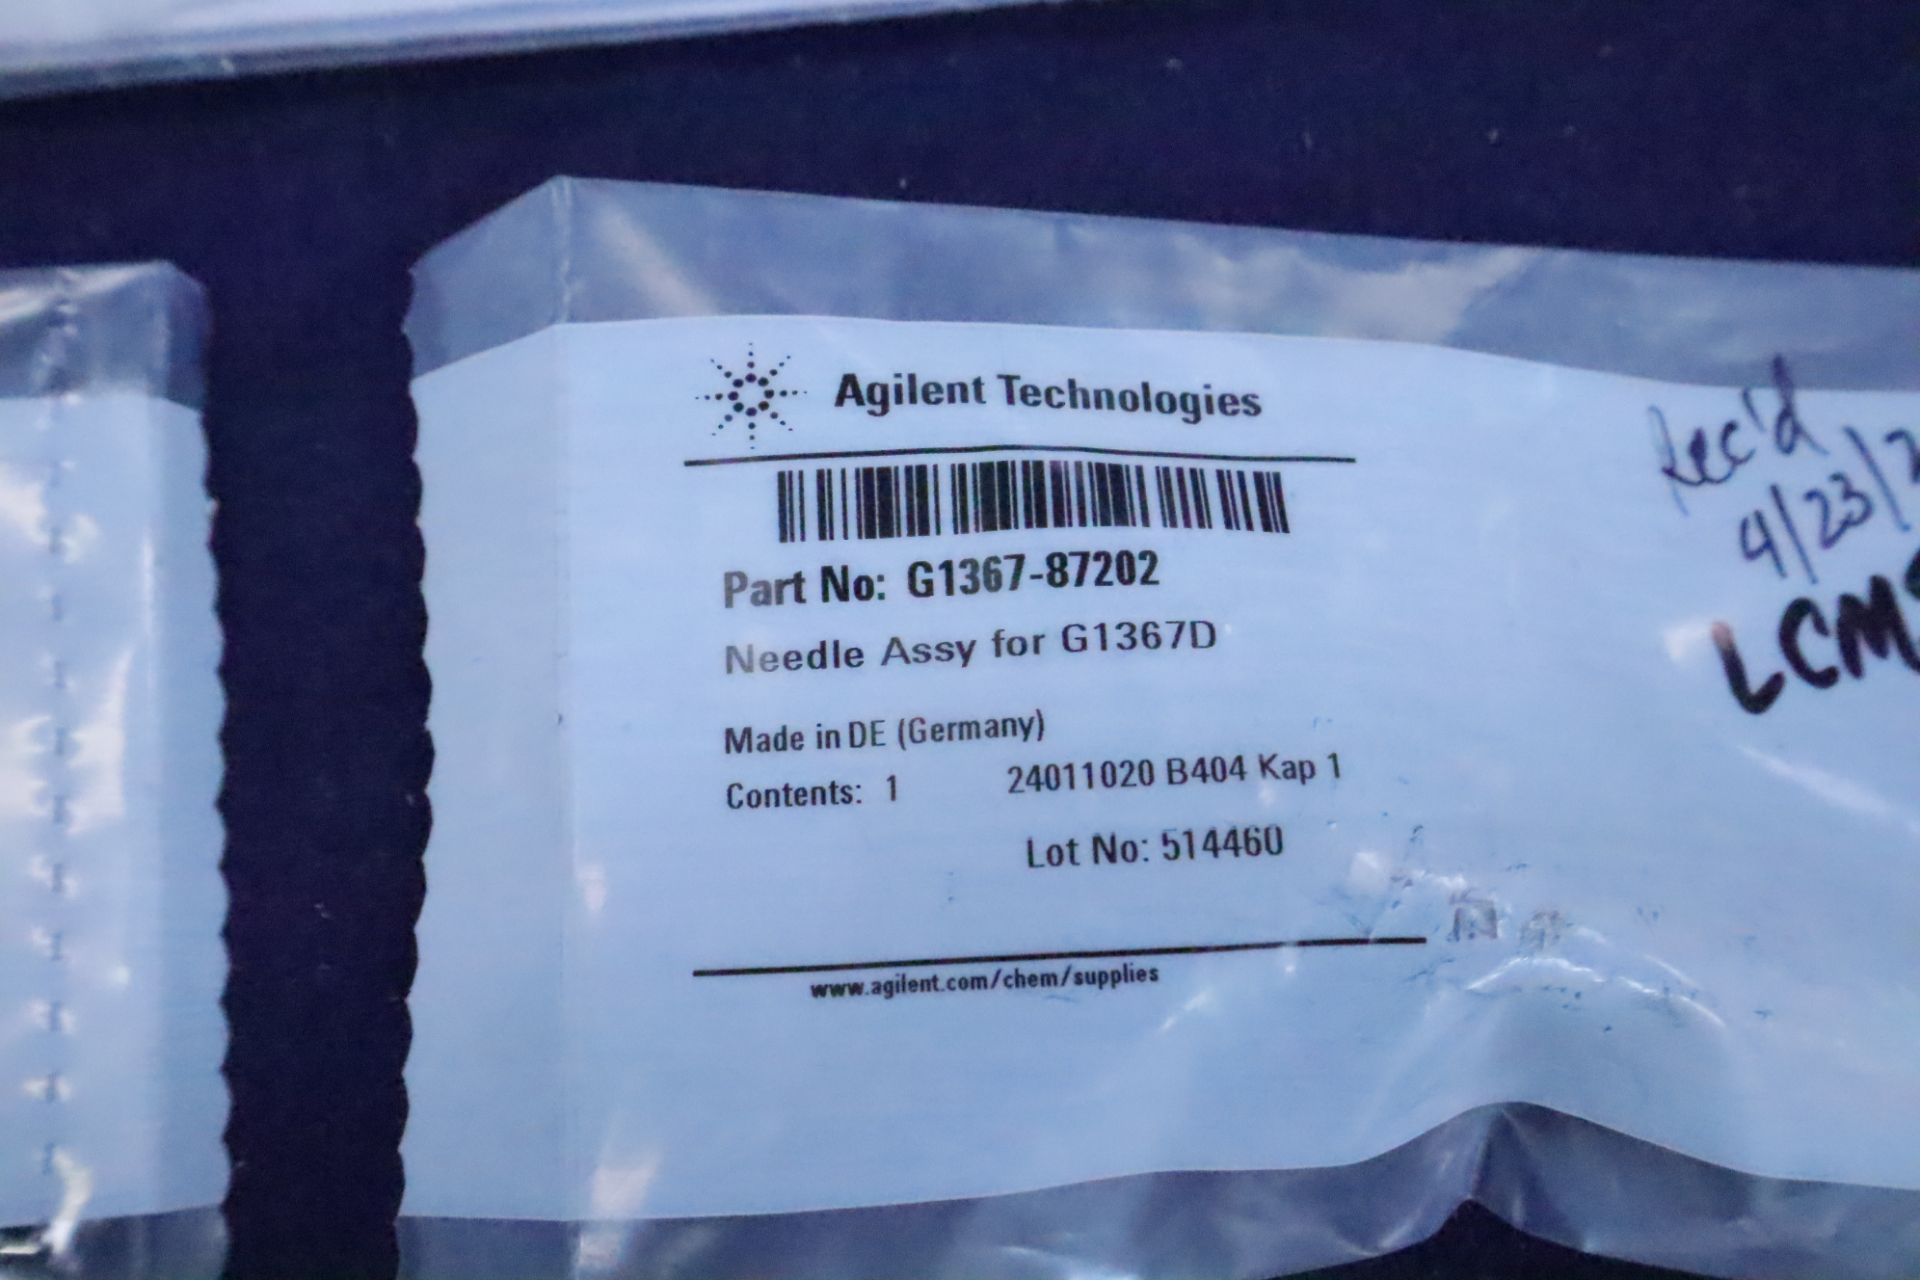 (NIB) Agilent Technologies OEM Replacement Parts for LC/MS Machines - Image 24 of 28